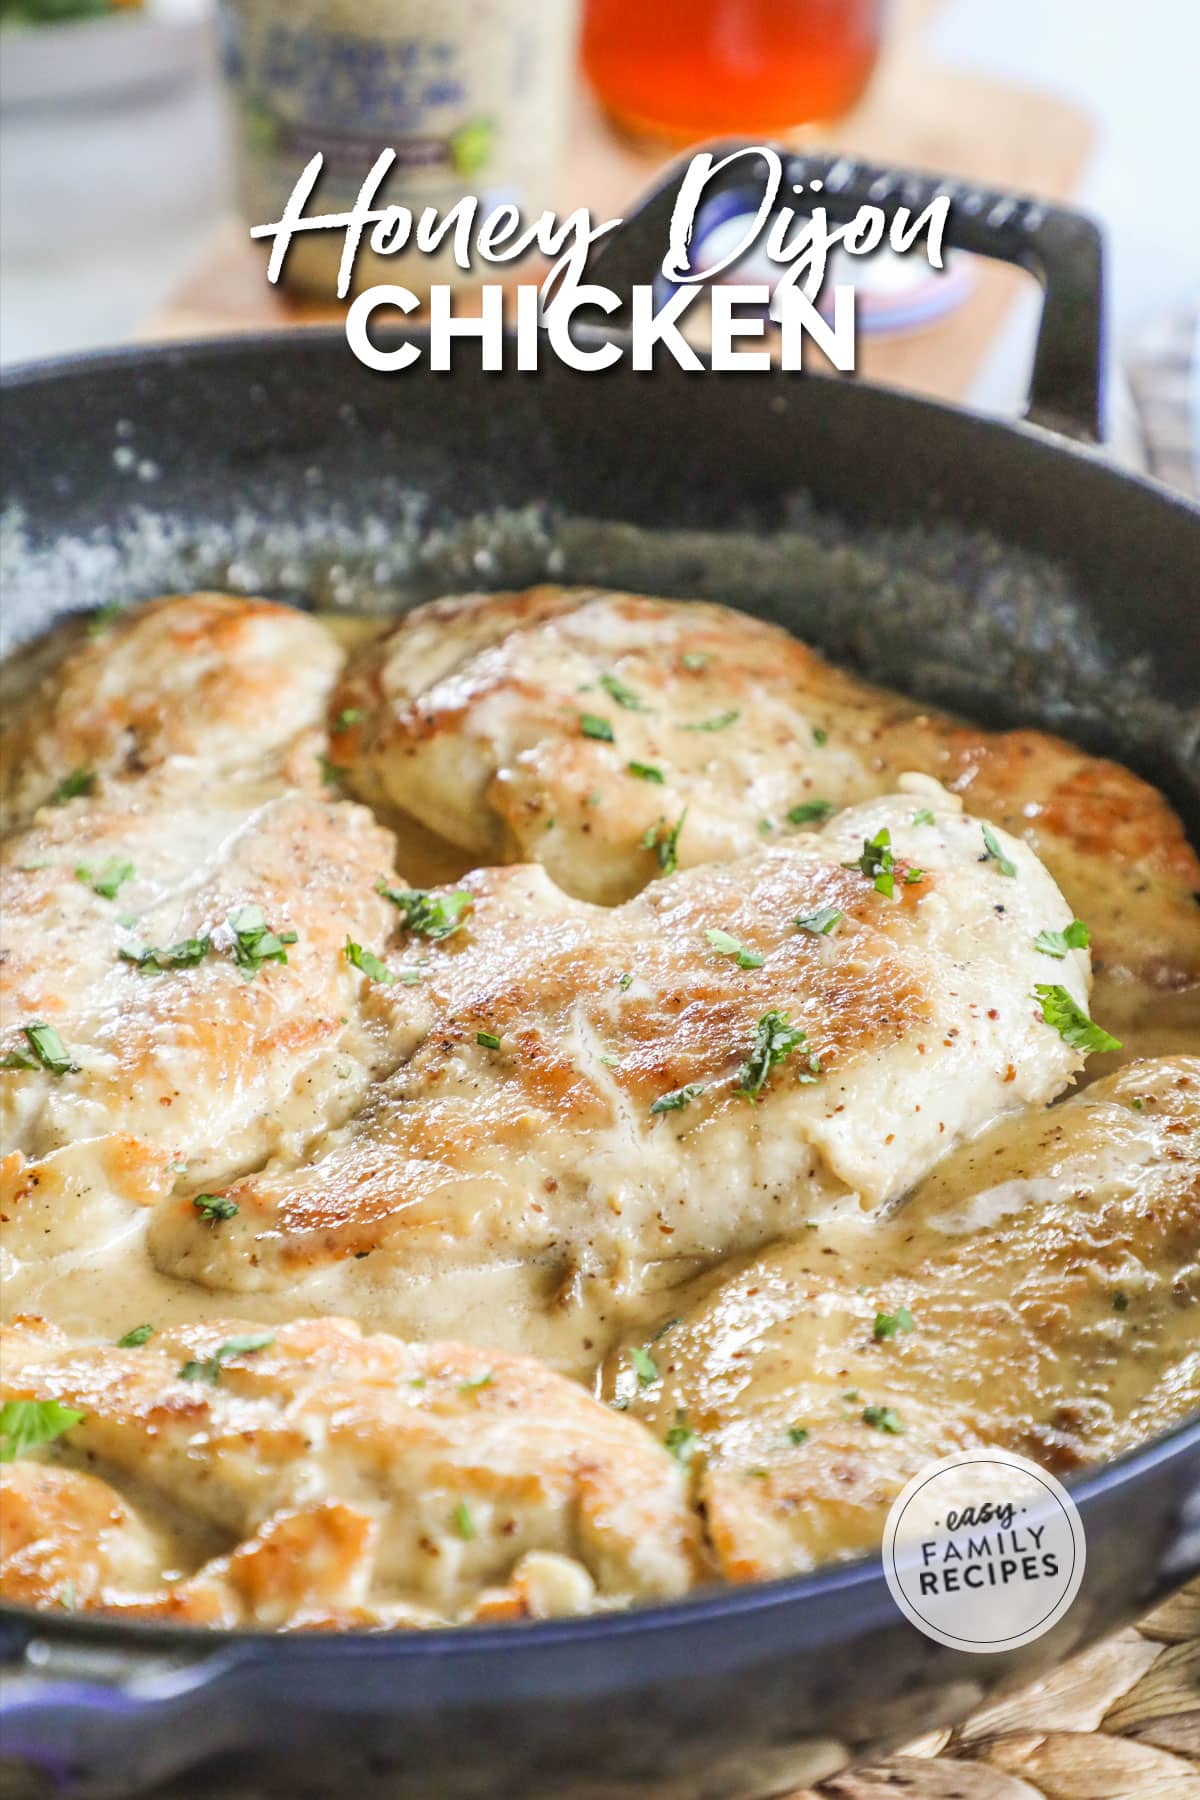 A pan of chicken simmered in a creamy Dijon mustard sauce.